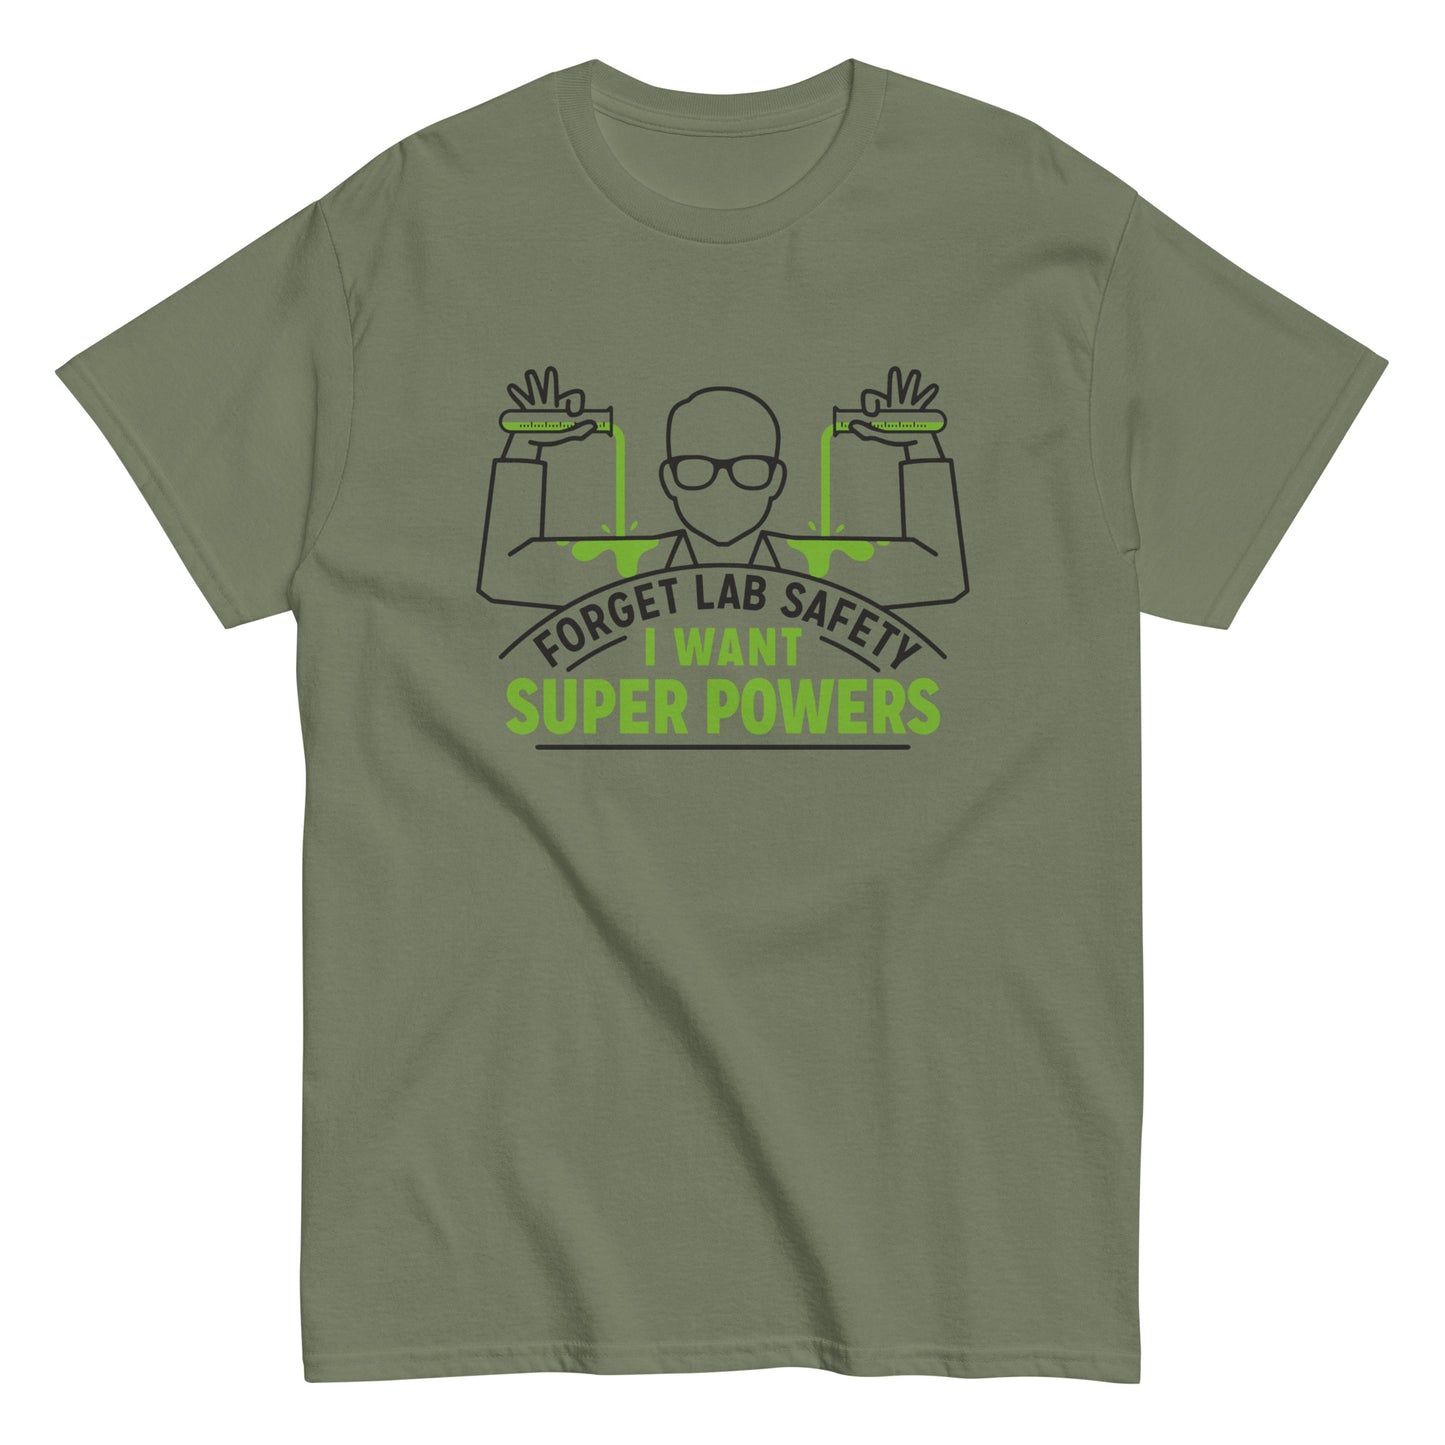 Forget Lab Safety Men's Classic Tee